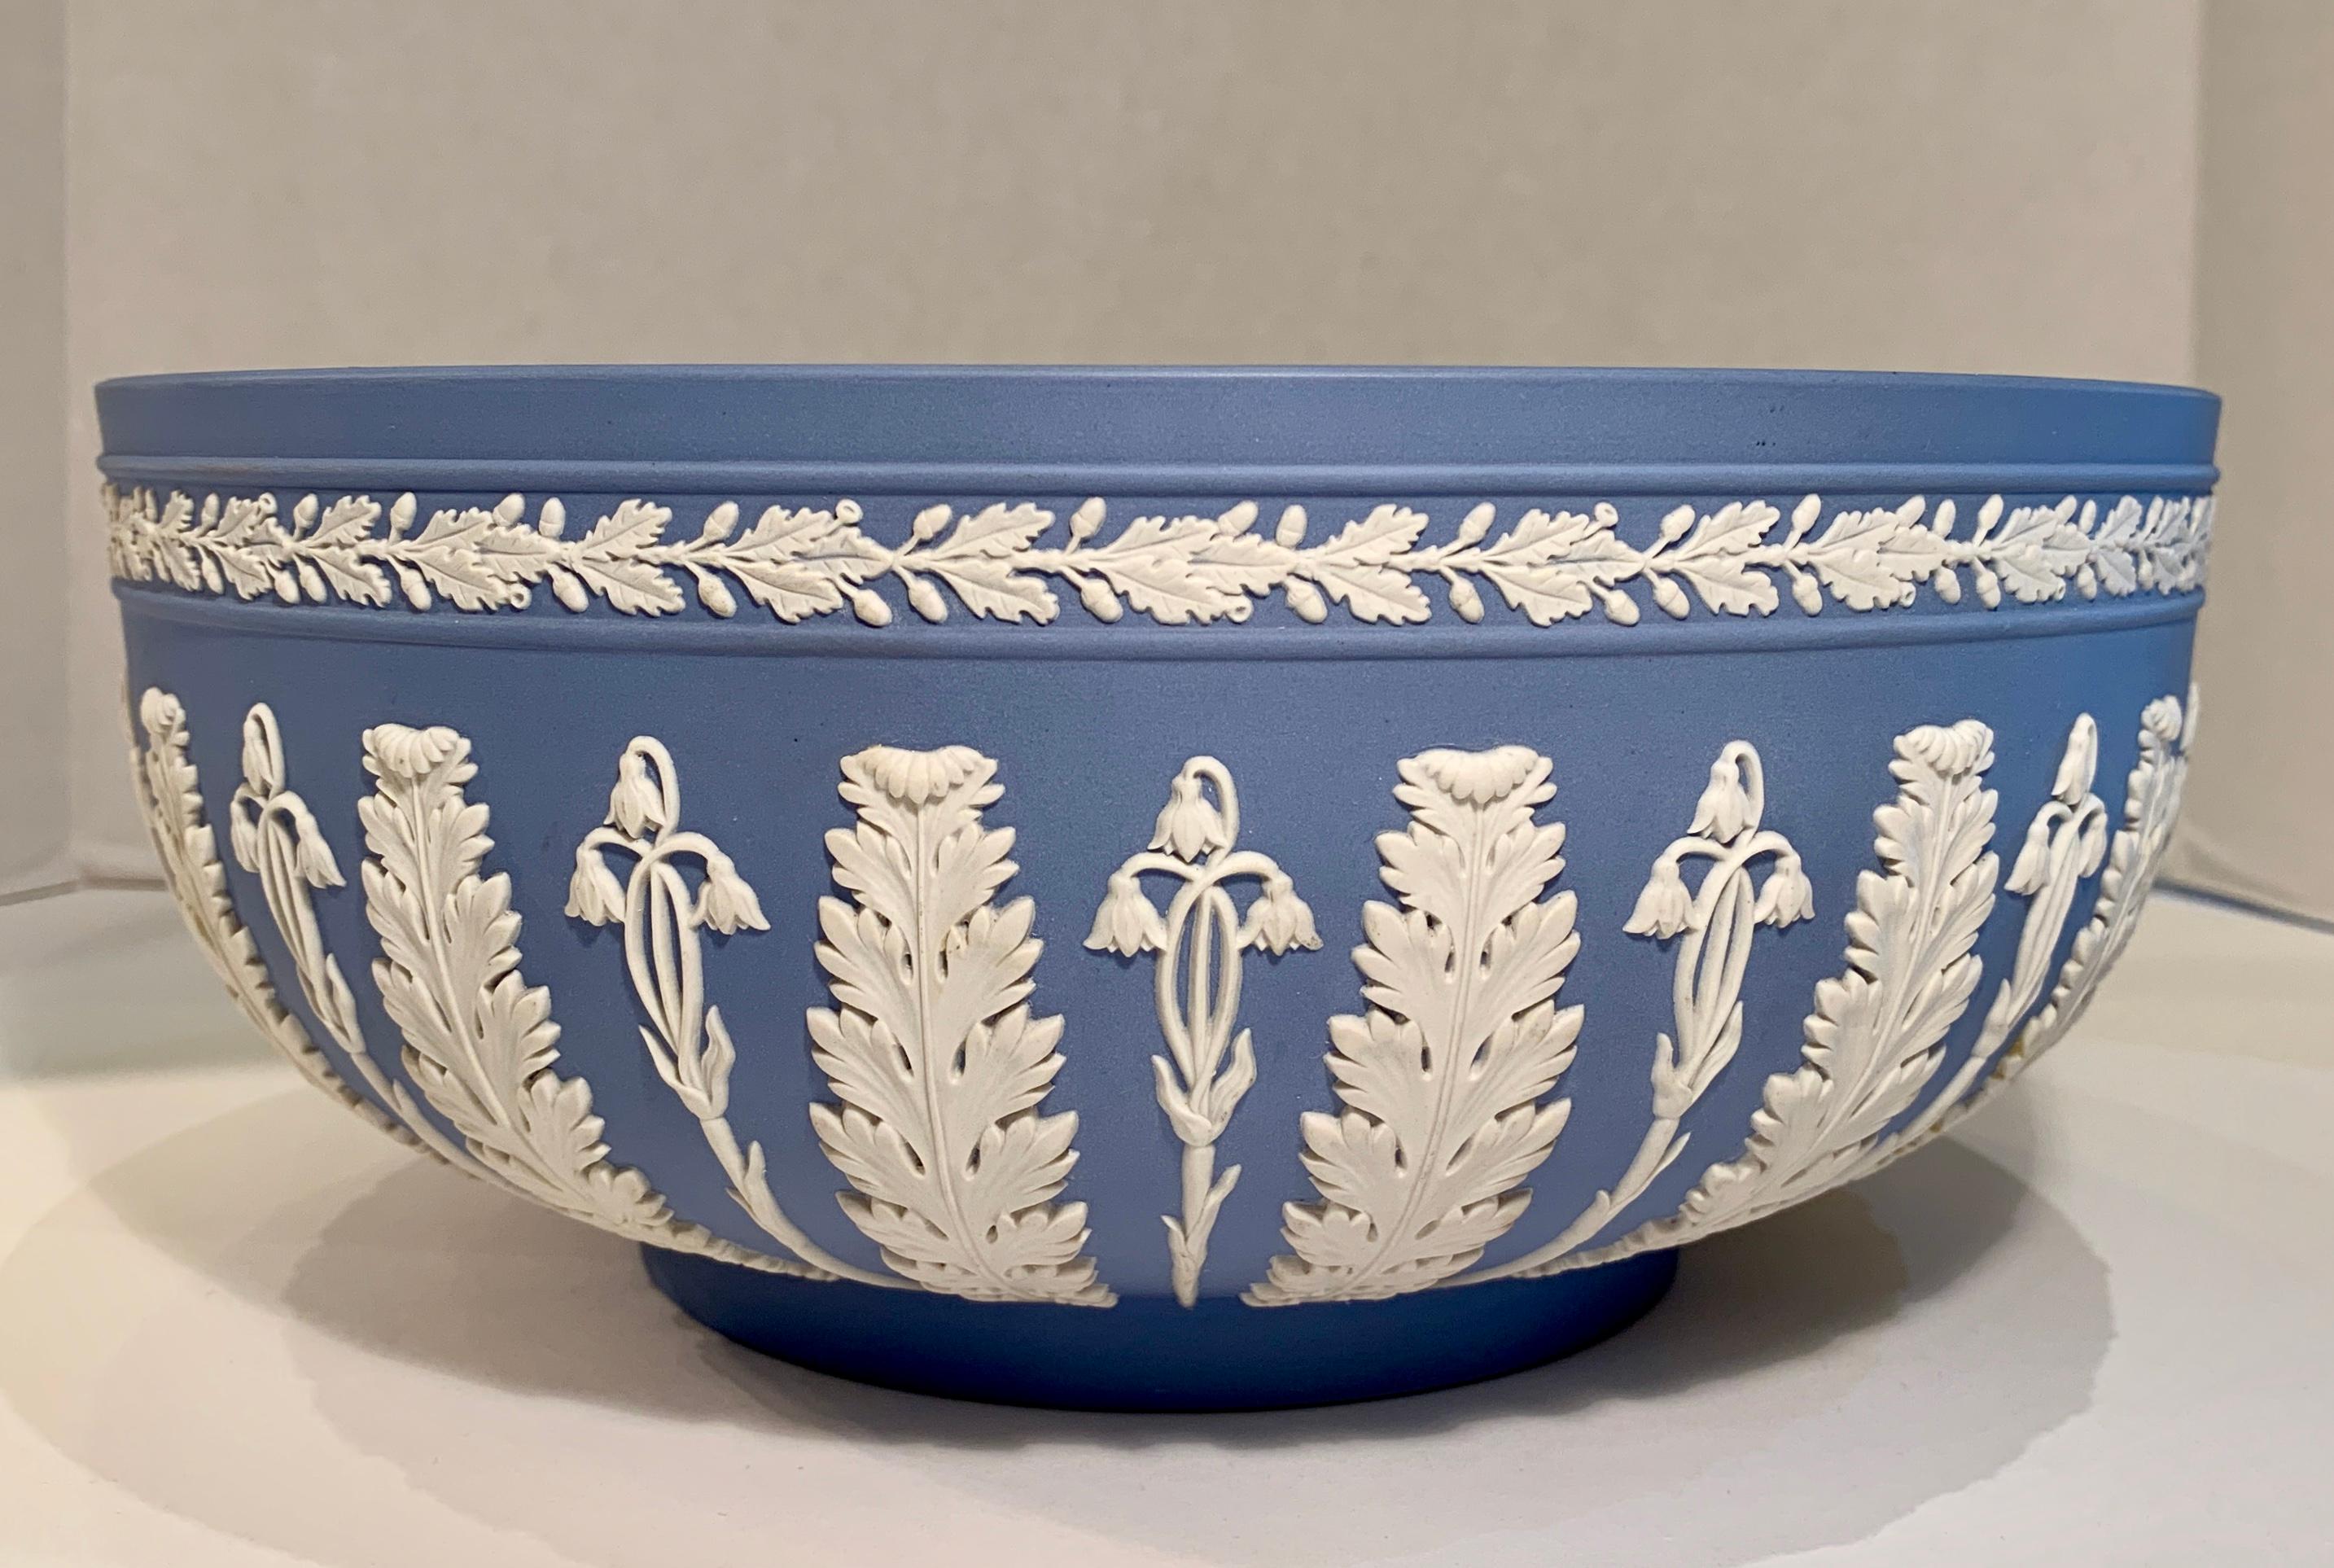 Beautiful estate English Wedgwood Jasperware large bowl in “Wedgwood Blue” features a repeating motif of white, high relief acanthus leaves alternating with floral sprigs and a floral banded border.

Jasperware or jasper ware is a type of pottery